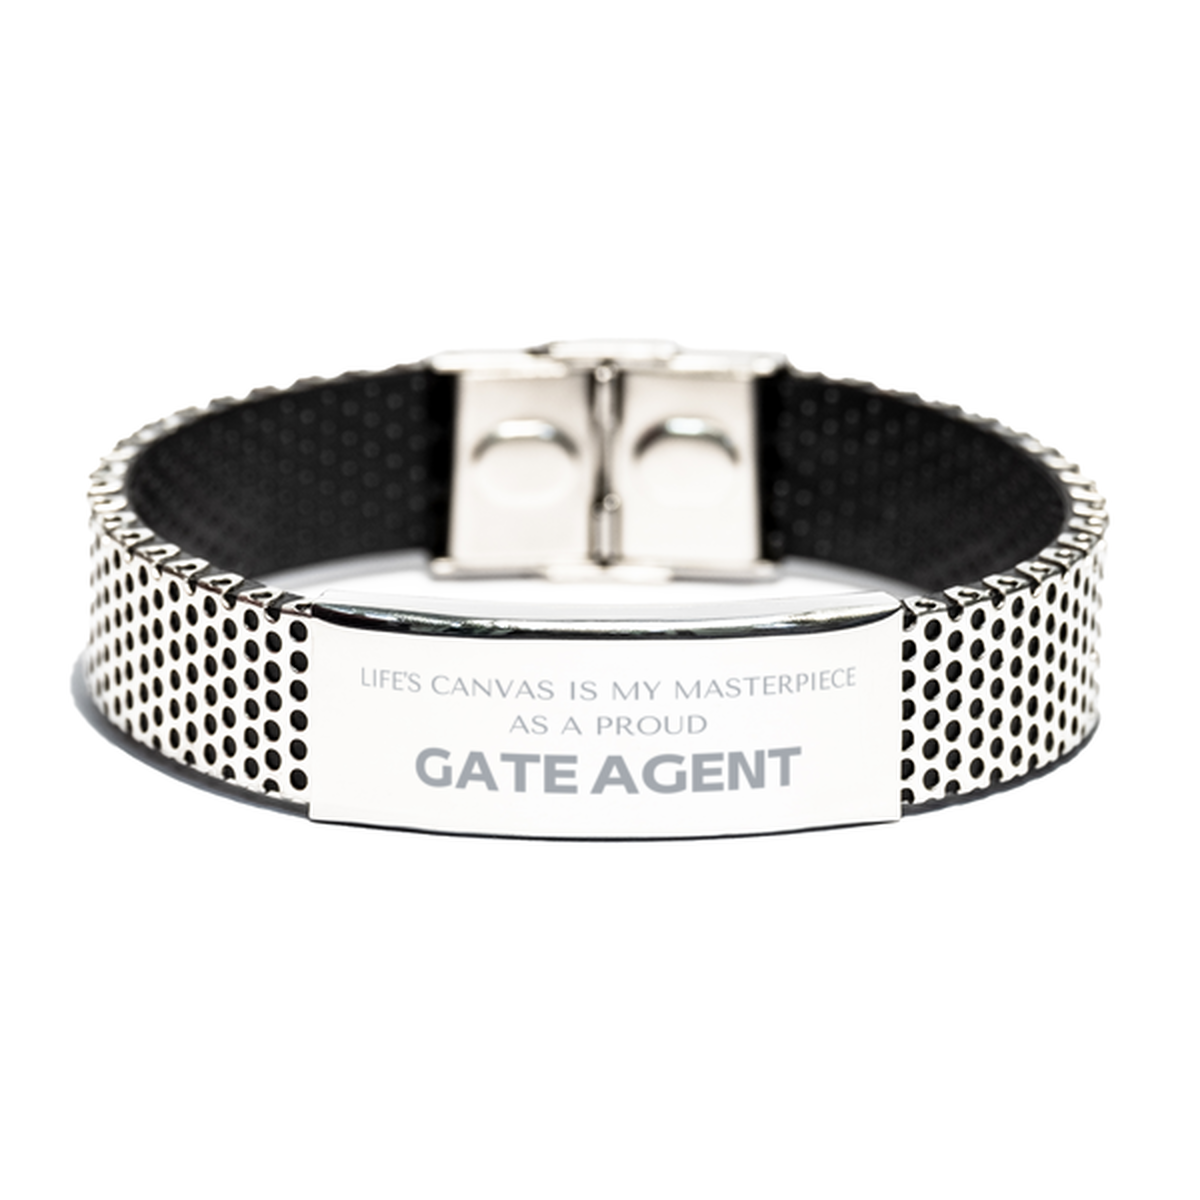 Proud Gate Agent Gifts, Life's canvas is my masterpiece, Epic Birthday Christmas Unique Stainless Steel Bracelet For Gate Agent, Coworkers, Men, Women, Friends